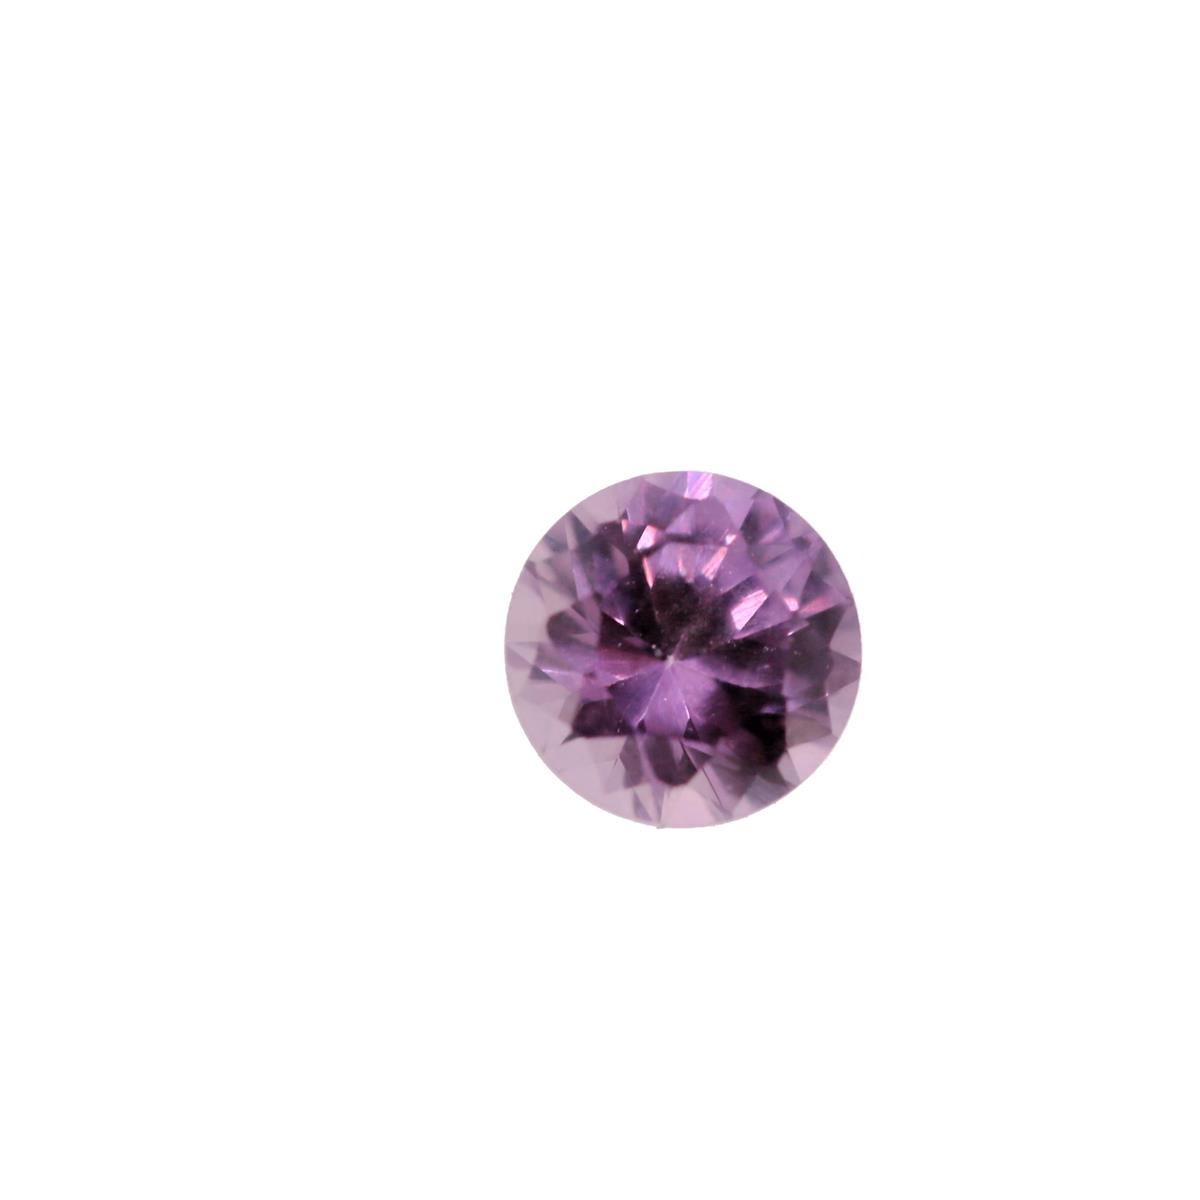 Modal Additional Images for Synthetic Alexandrite 5mm